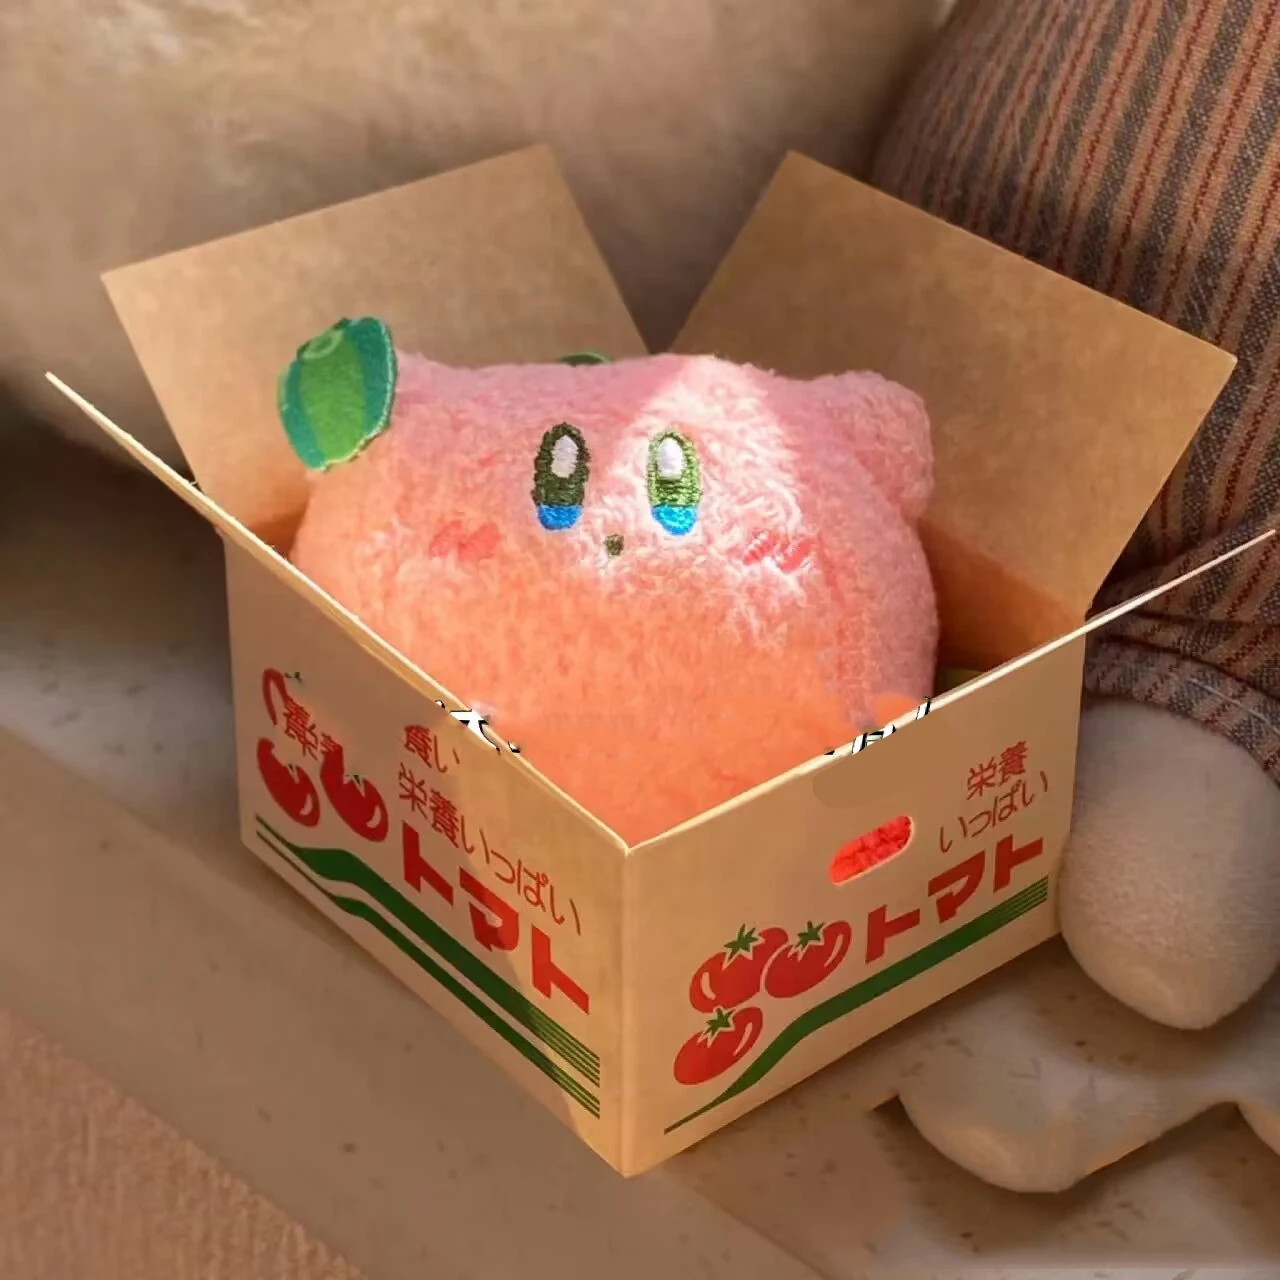 Kirby Plush Pendent Vegetable Series Action Figures Hoshi No Kirby Kawaii 9Cm Plush Soft Stuffed Toys Gifts for Girls